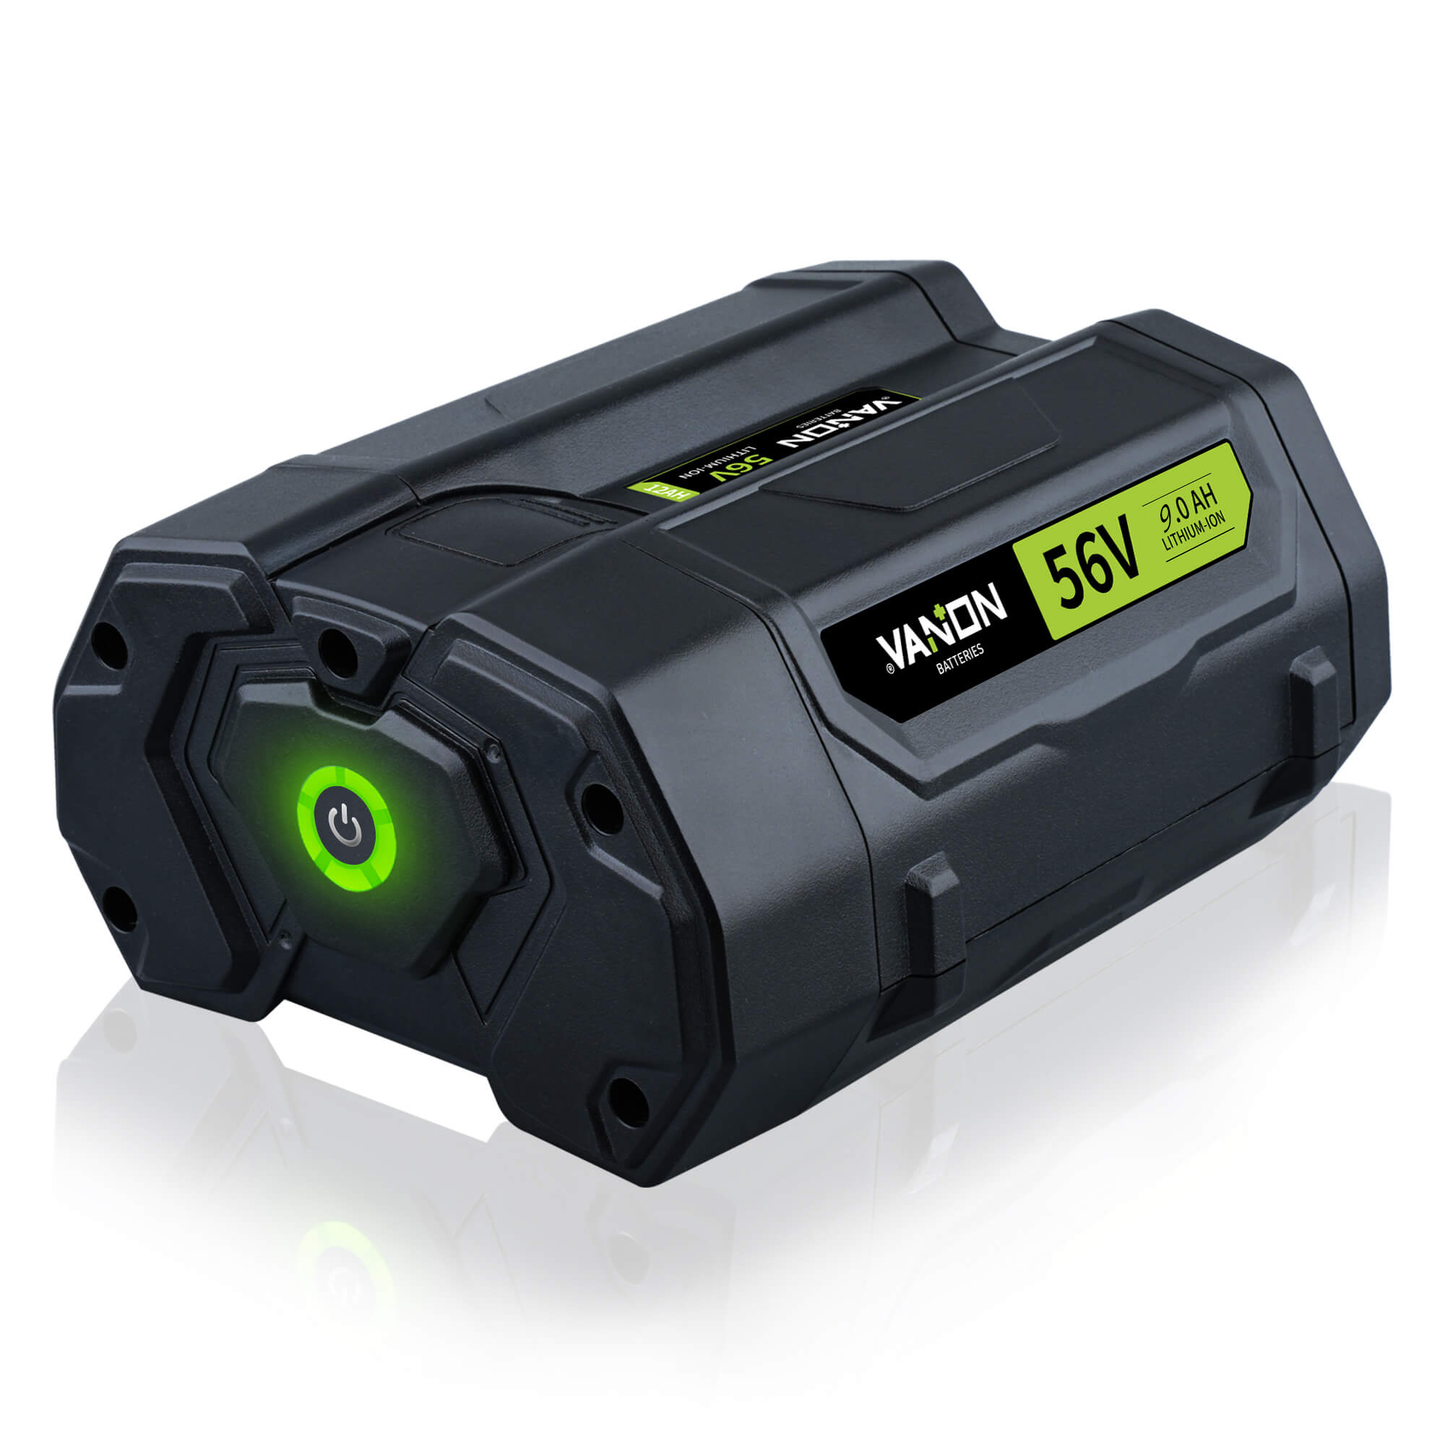 For EGO Battery 56V 9.0Ah | Compatible with All Power 56V EGO Power+ Tools